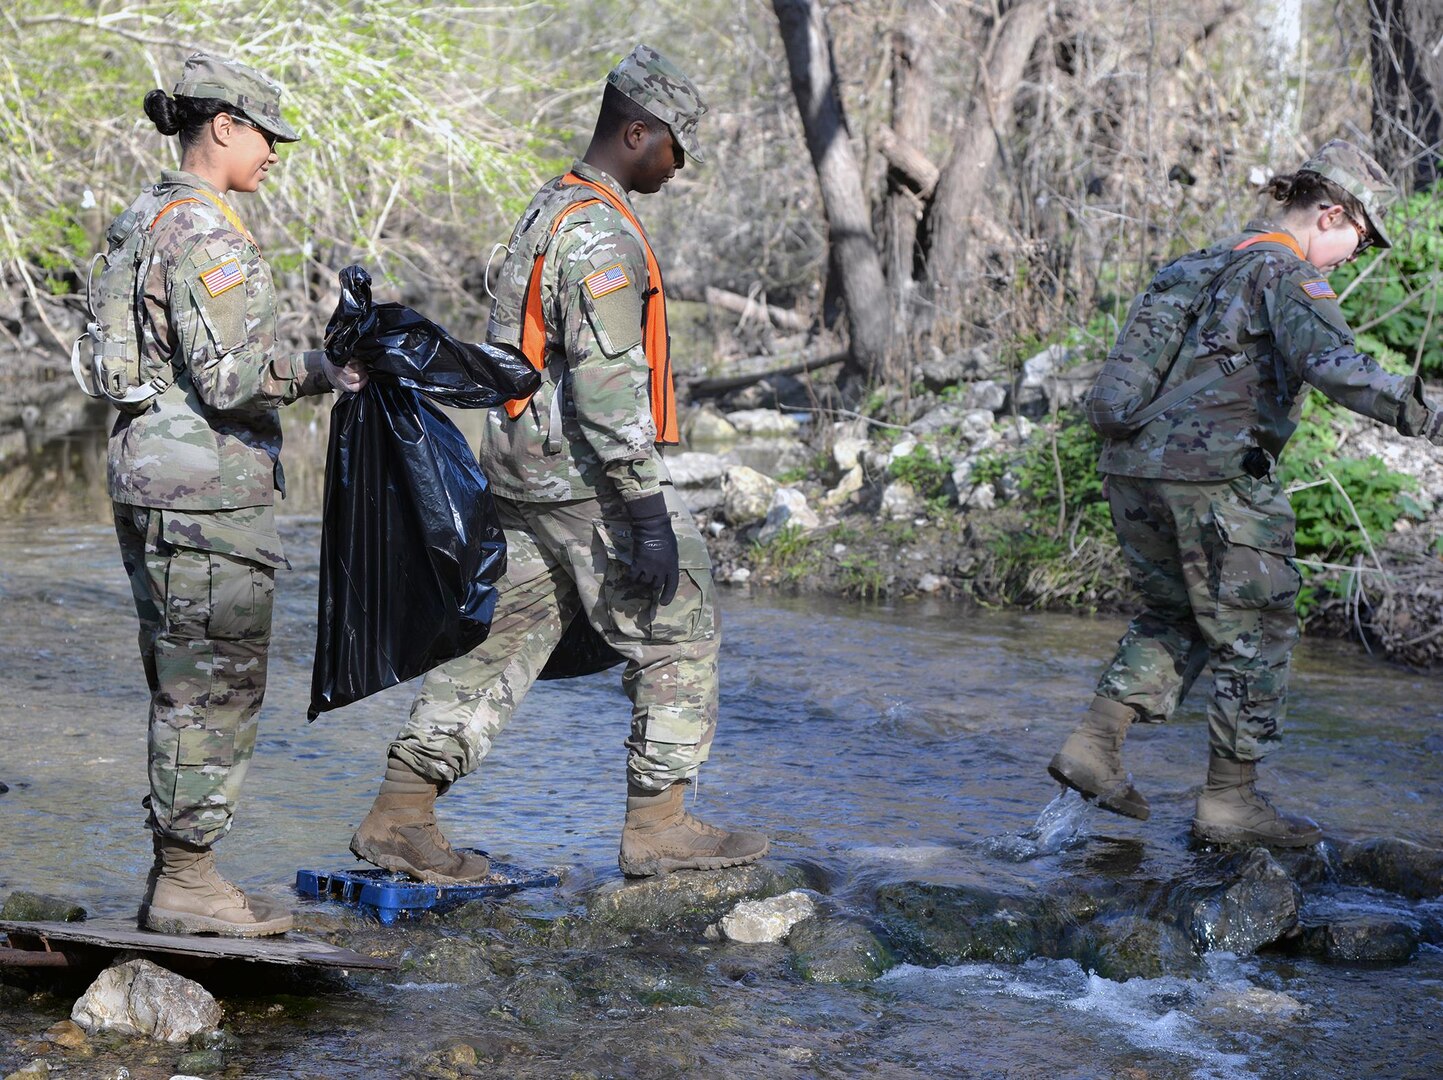 Why did the Soldiers cross the stream? To get to the other side and pick up more trash during the 2017 Basura Bash at Joint Base San Antonio-Fort Sam Houston.